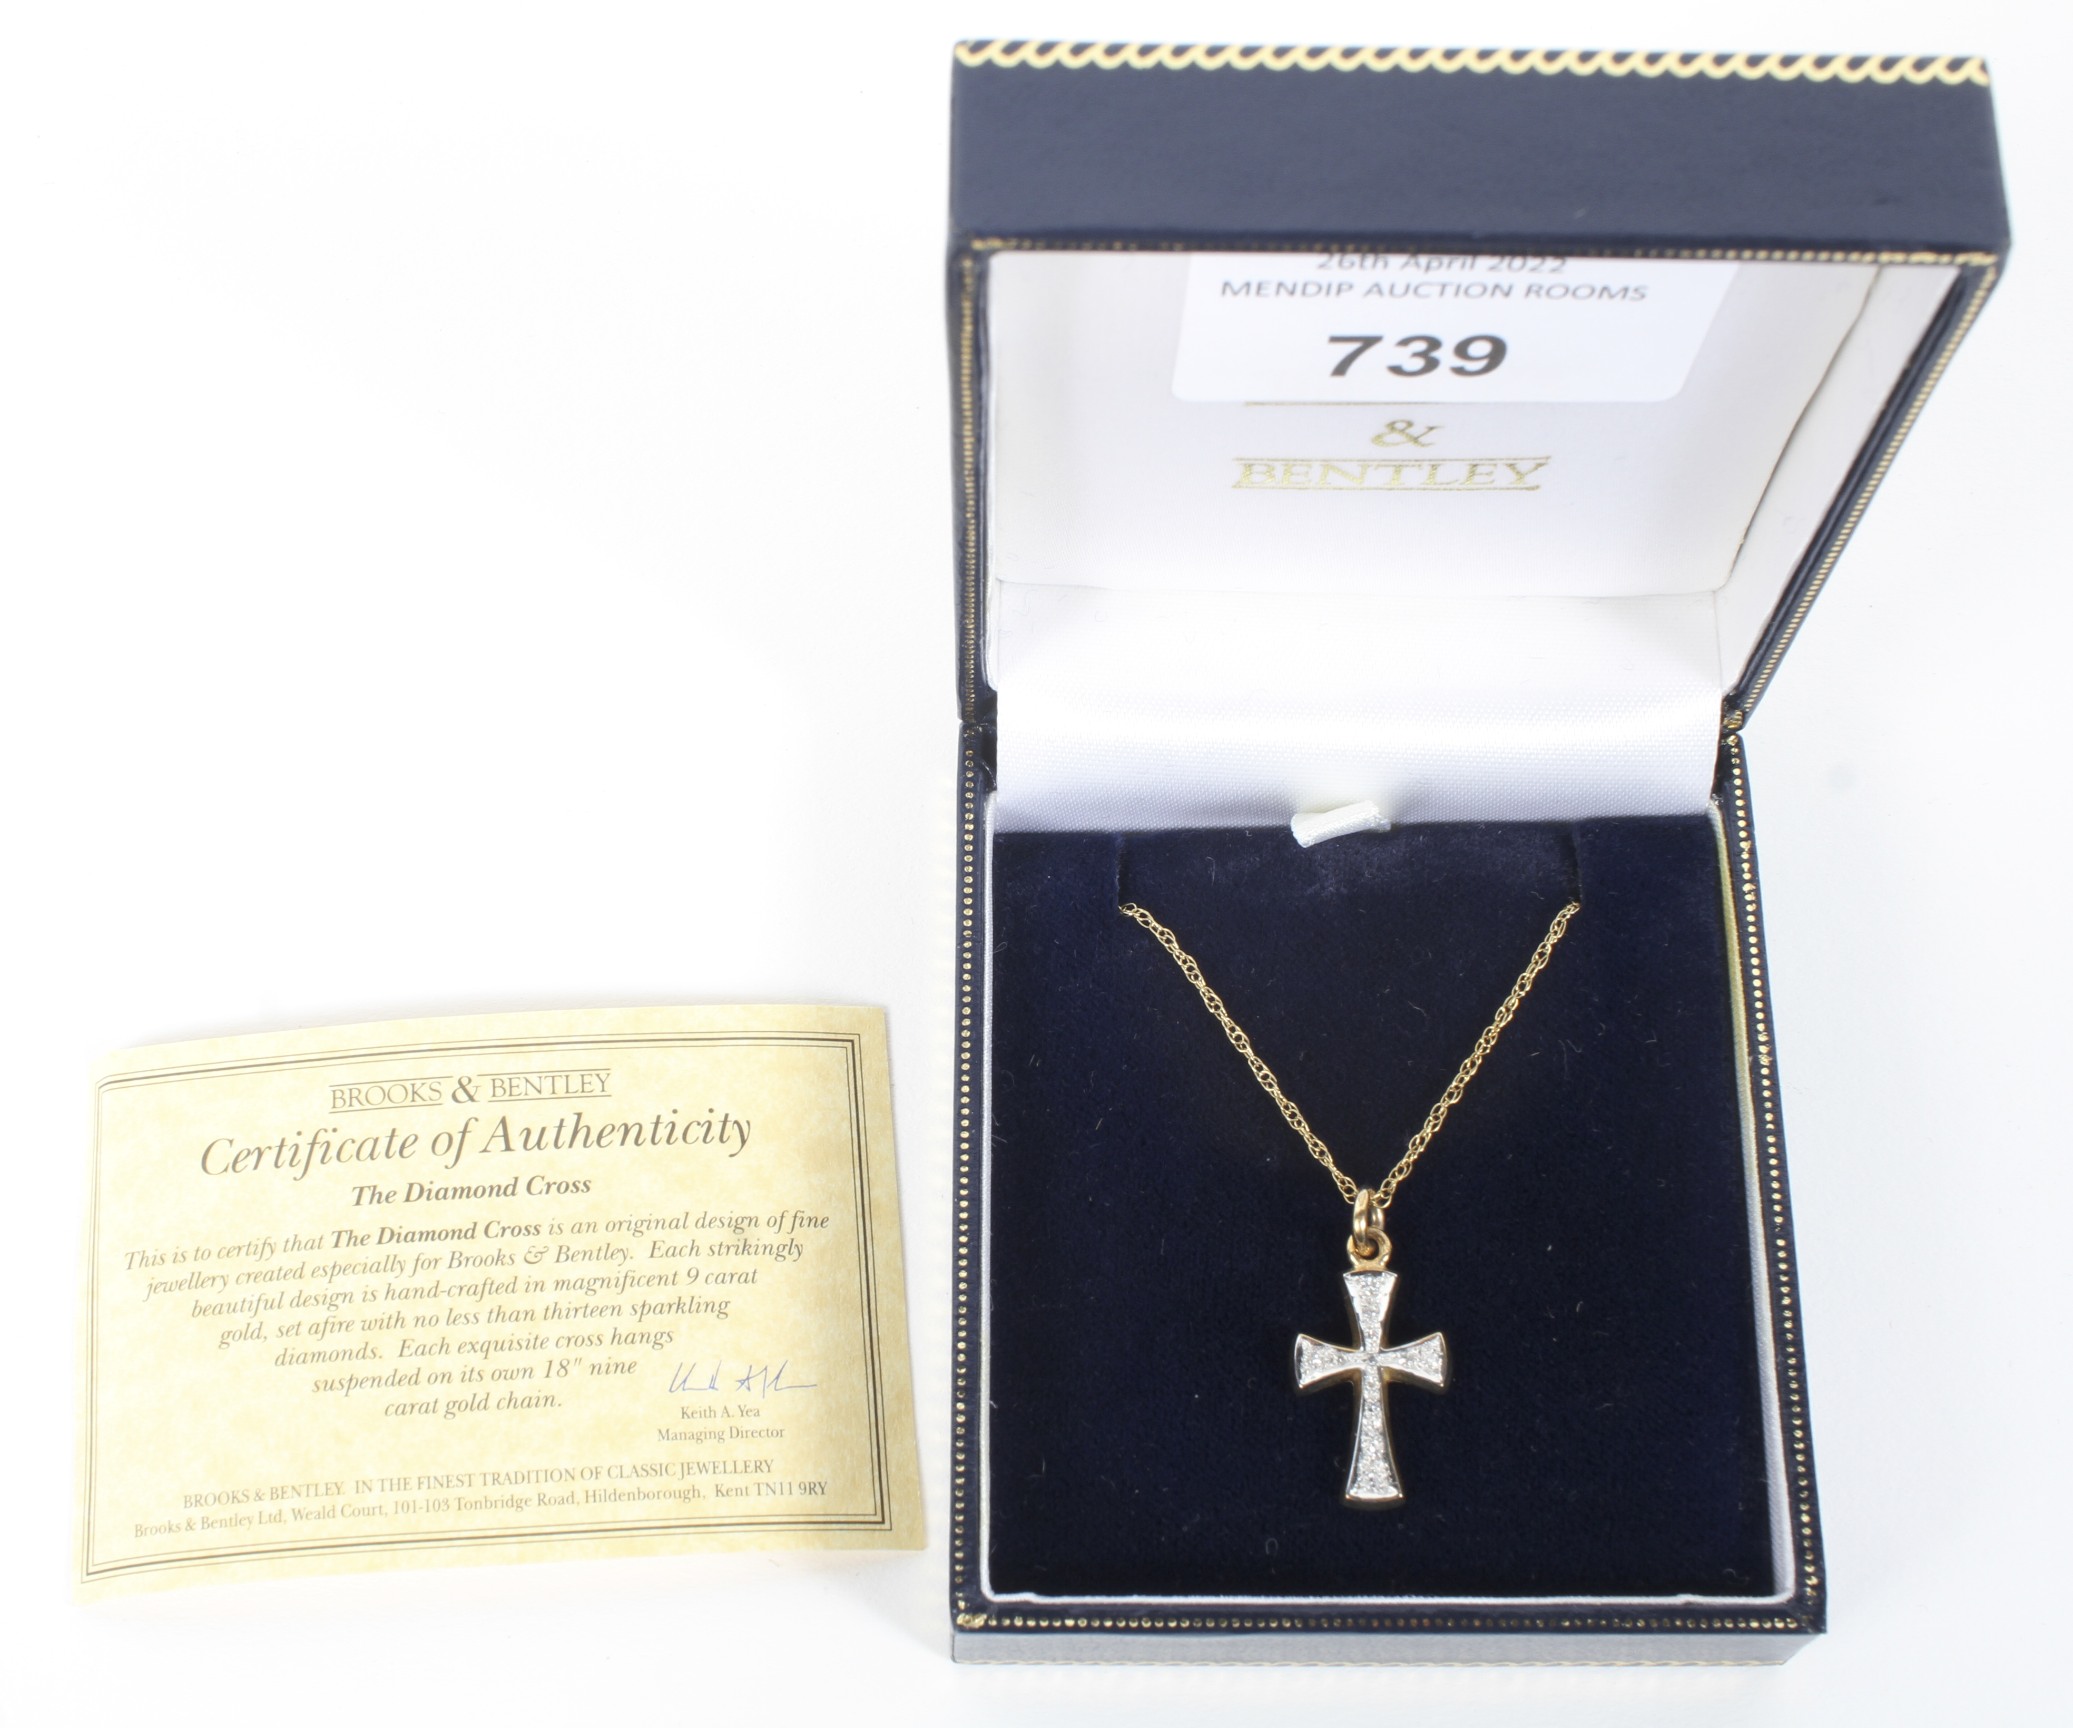 9ct gold diamond encrusted cross on a 9ct gold chain, in Brooks & Bentley box, - Image 2 of 2